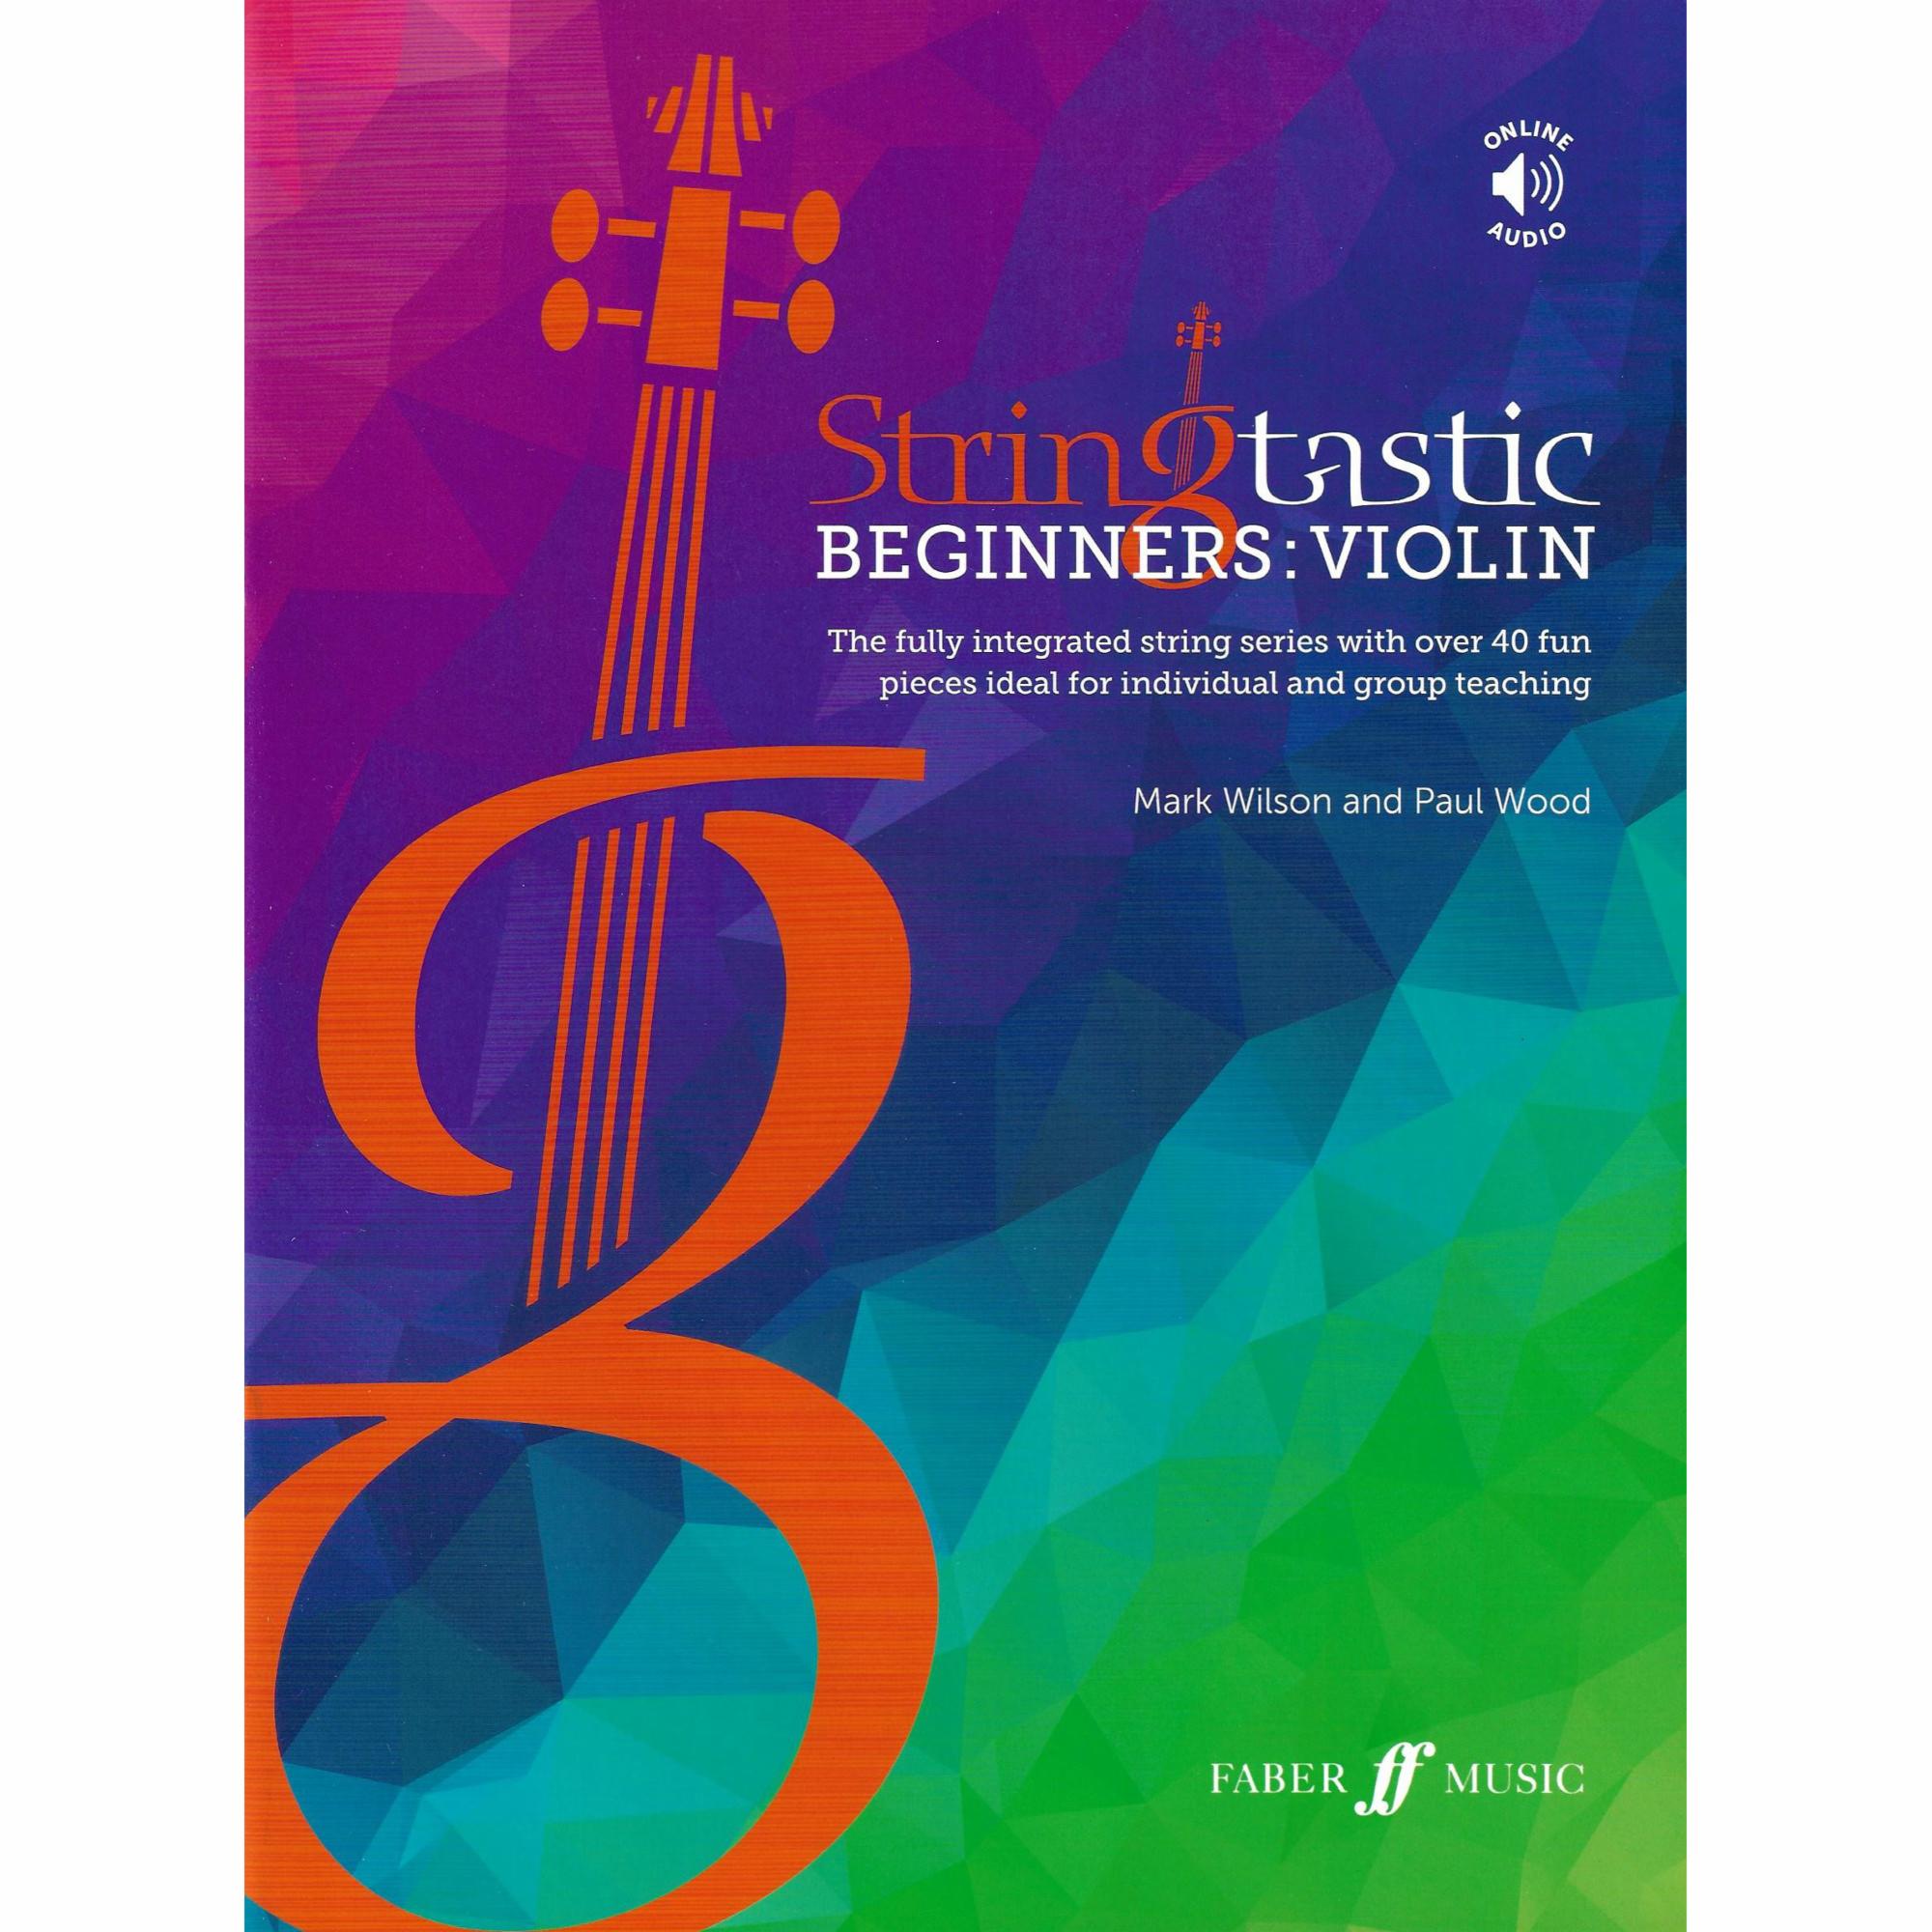 Stringtastic Beginners for Violin, Viola, Cello, Bass and Piano